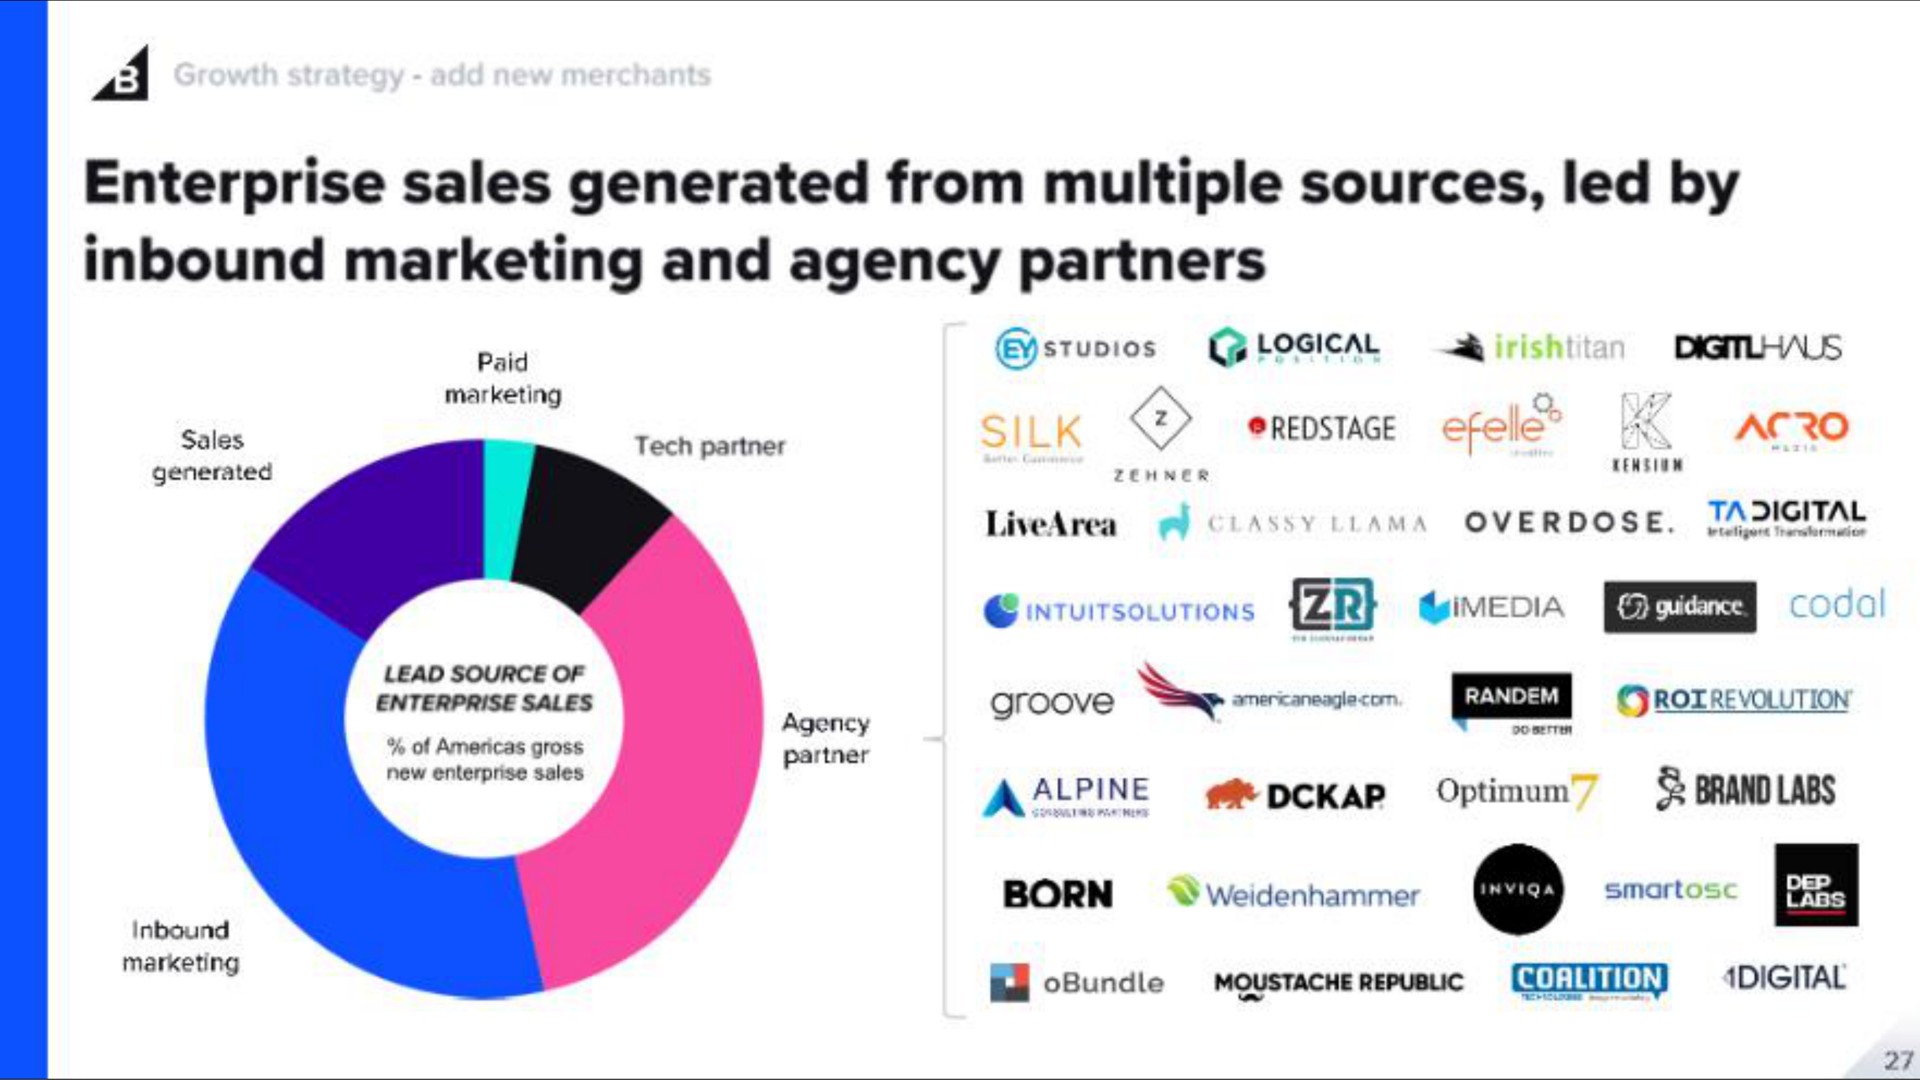 a enterprise sales generated from multiple sources led by inbound marketing and agency partners | BigCommerce